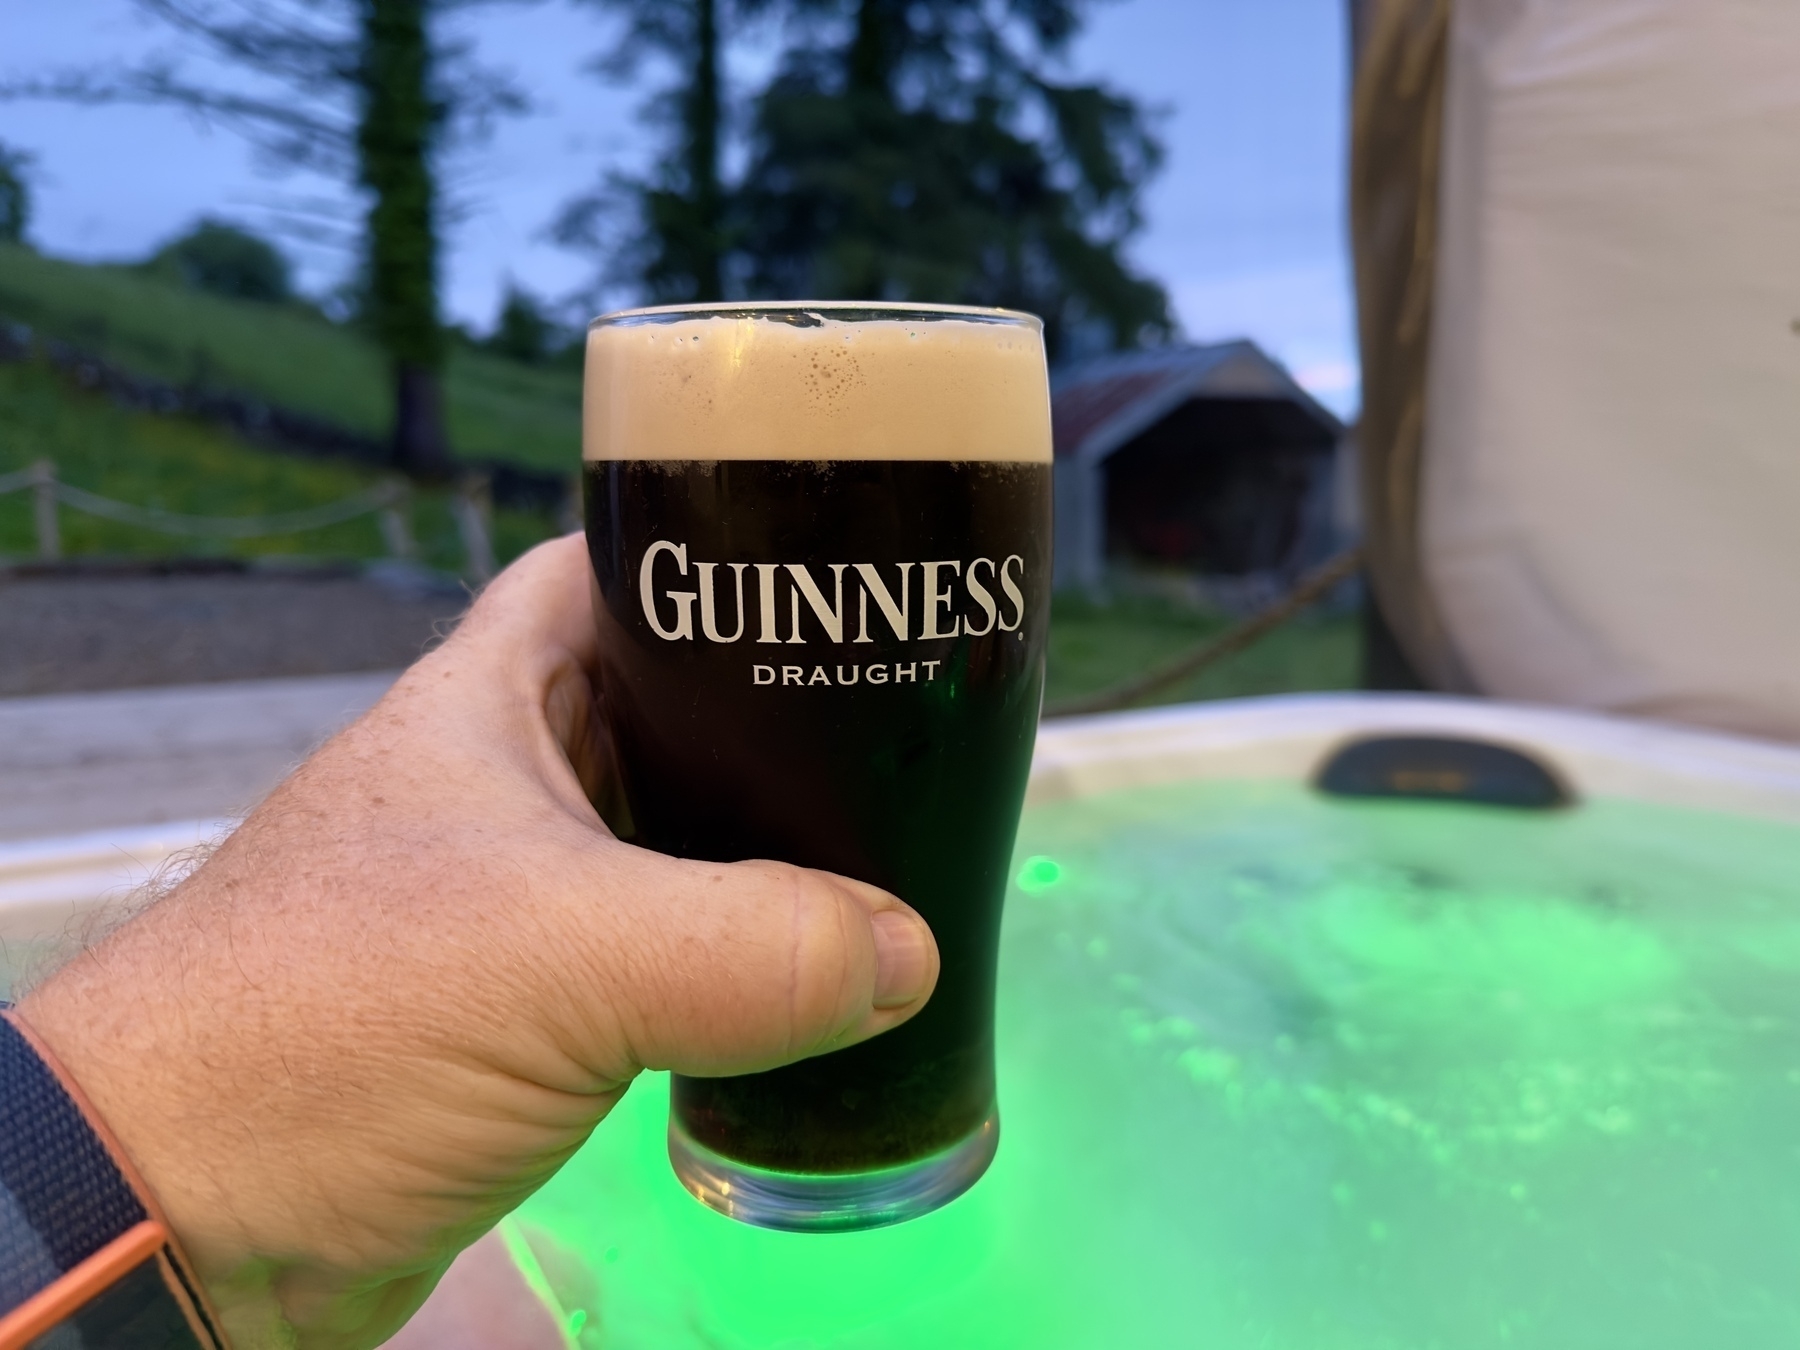 Auto-generated description: A hand is holding a pint of Guinness Draught near a glowing green hot tub in an outdoor setting.